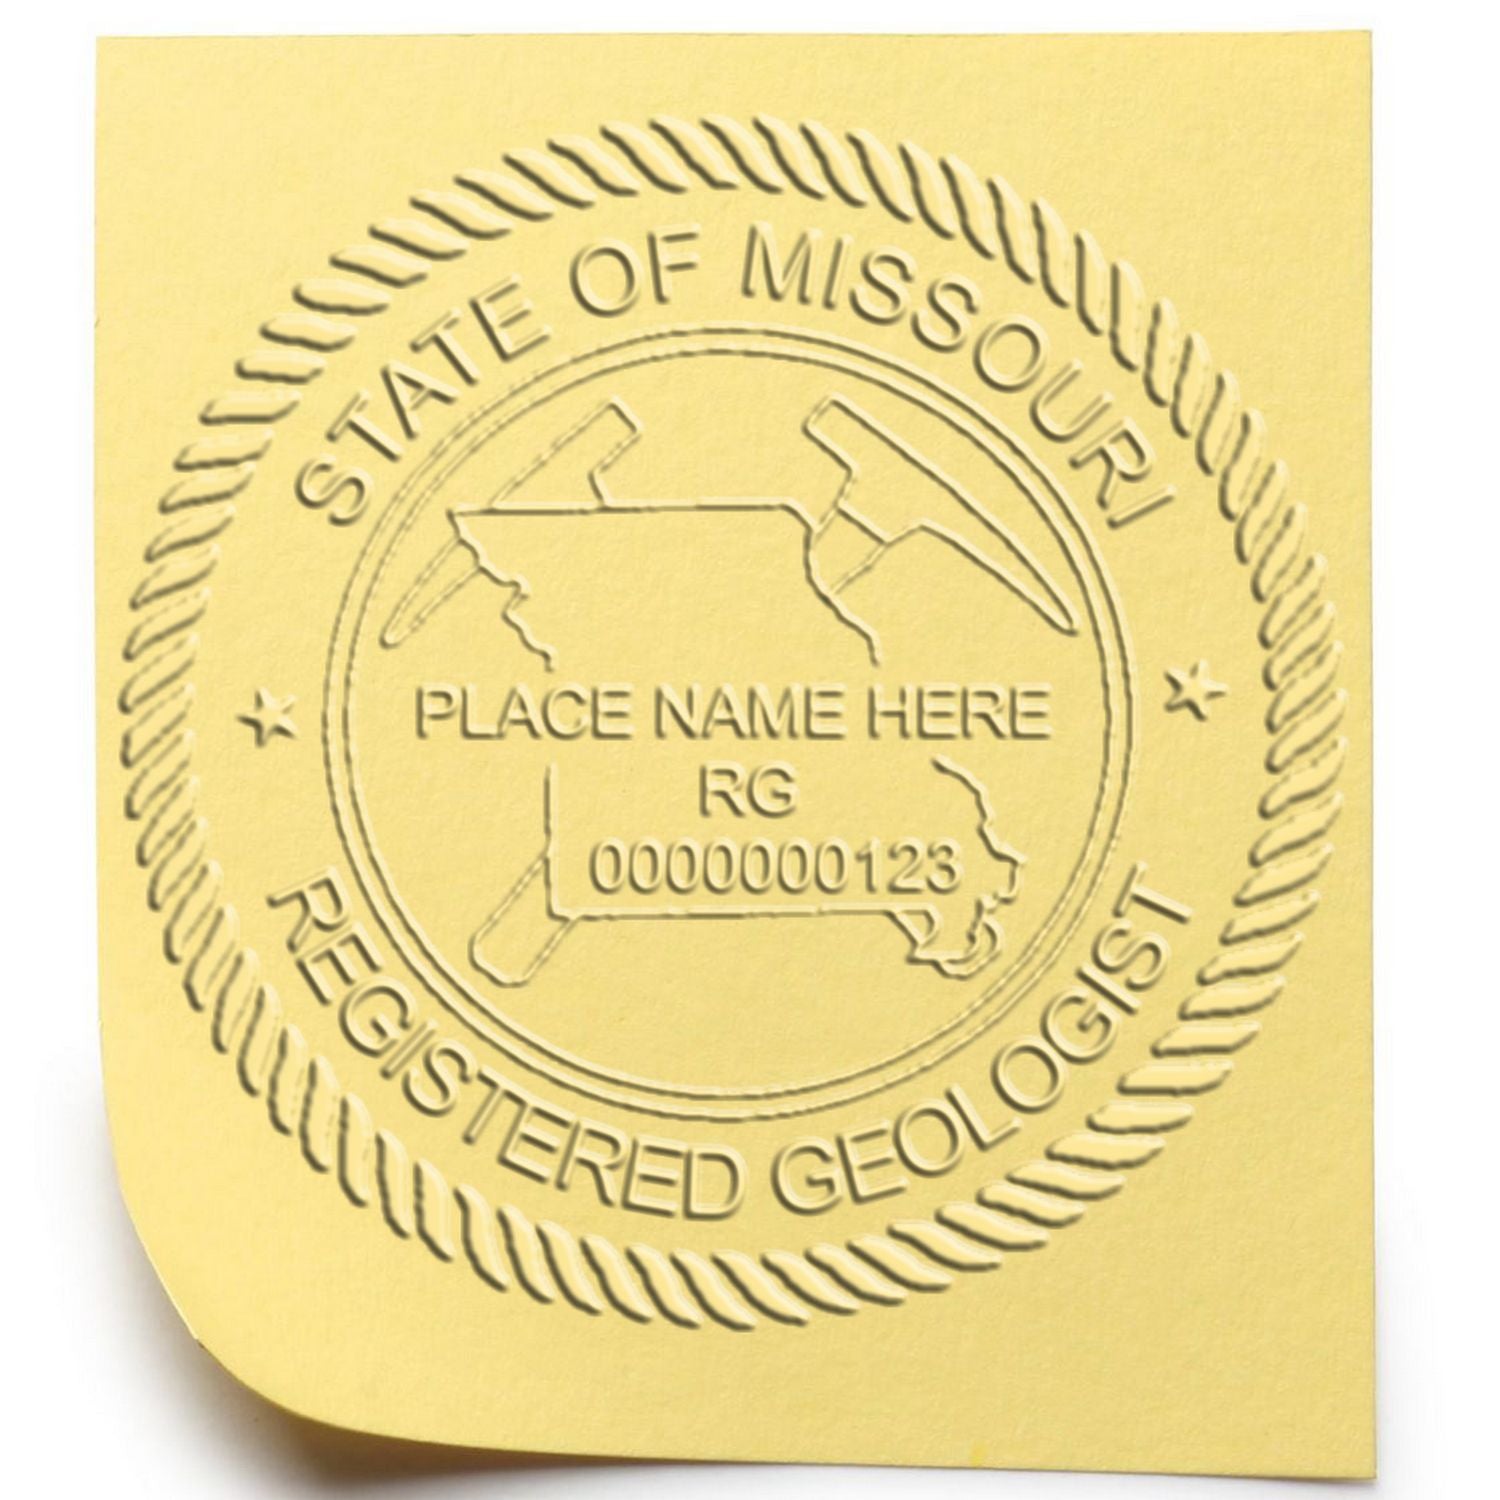 The main image for the Handheld Missouri Professional Geologist Embosser depicting a sample of the imprint and imprint sample